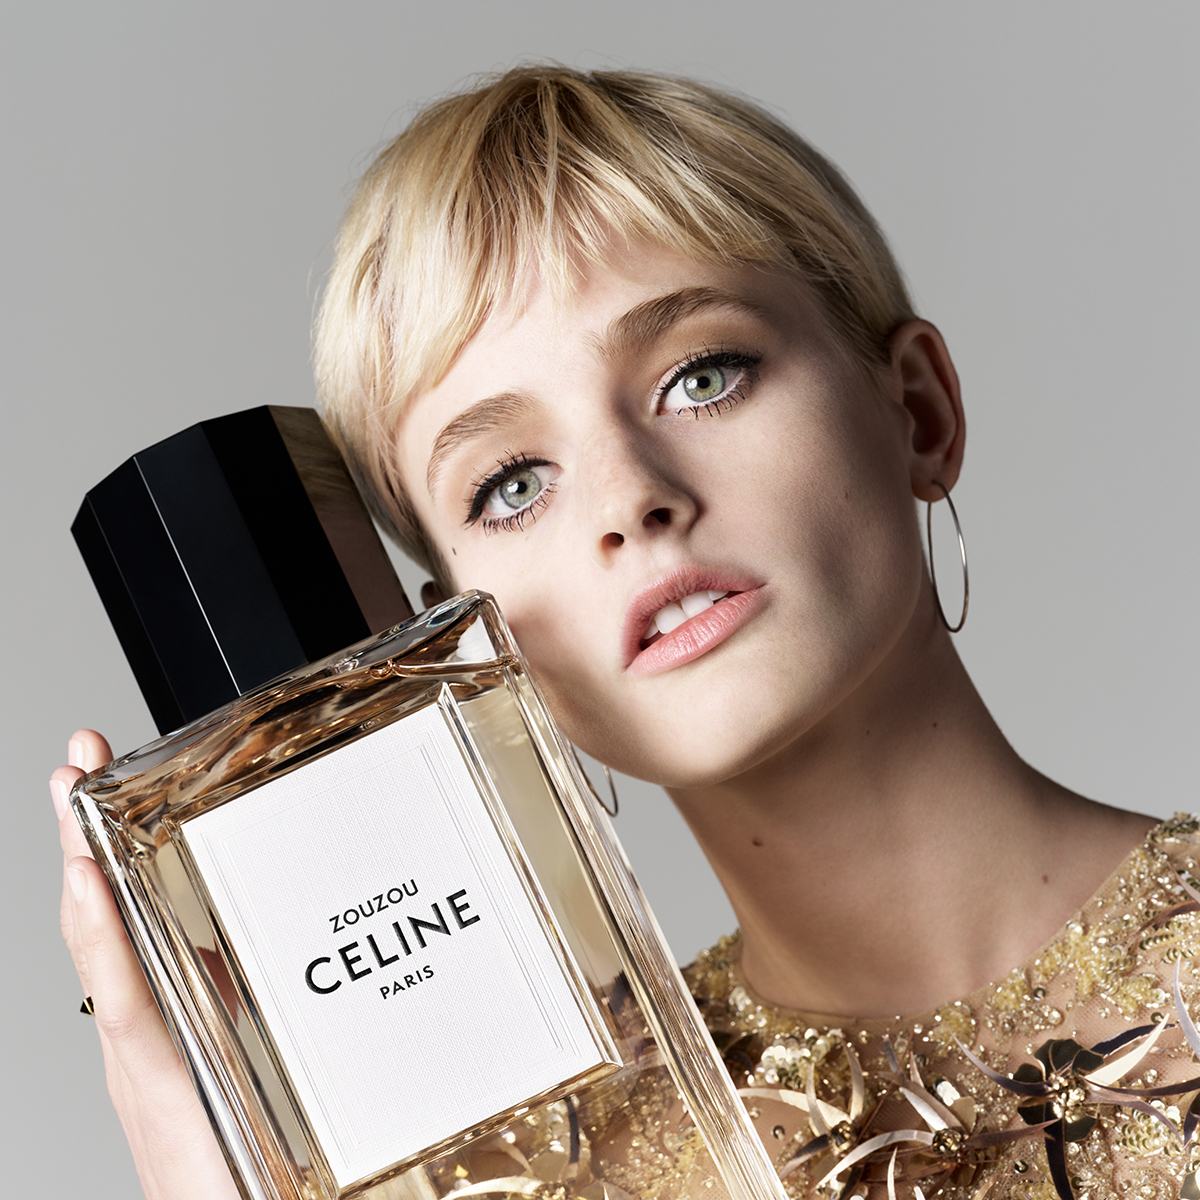 Celine’s Zouzou: A Fragrant Ode to Eternal Youth and Reckless Charm